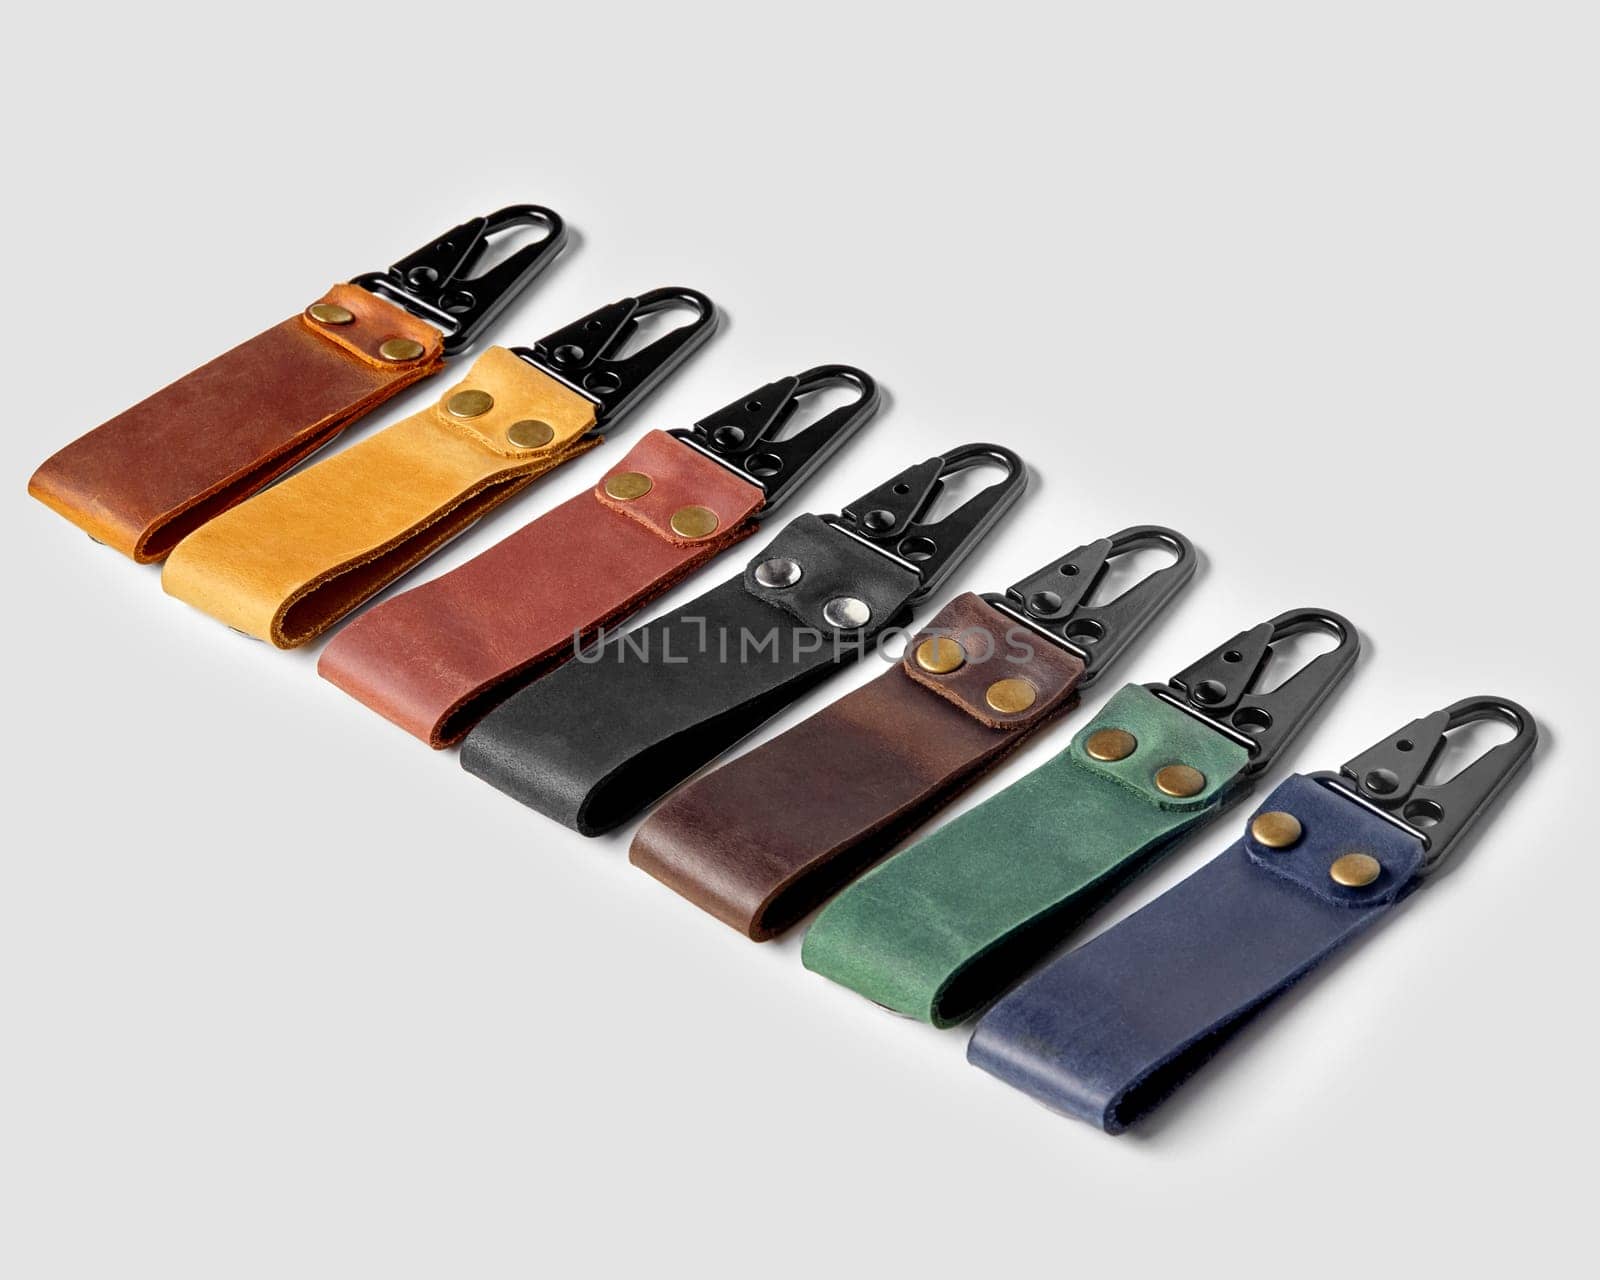 Handcrafted embossed leather keychains of various colors with carabiner clasps by nazarovsergey